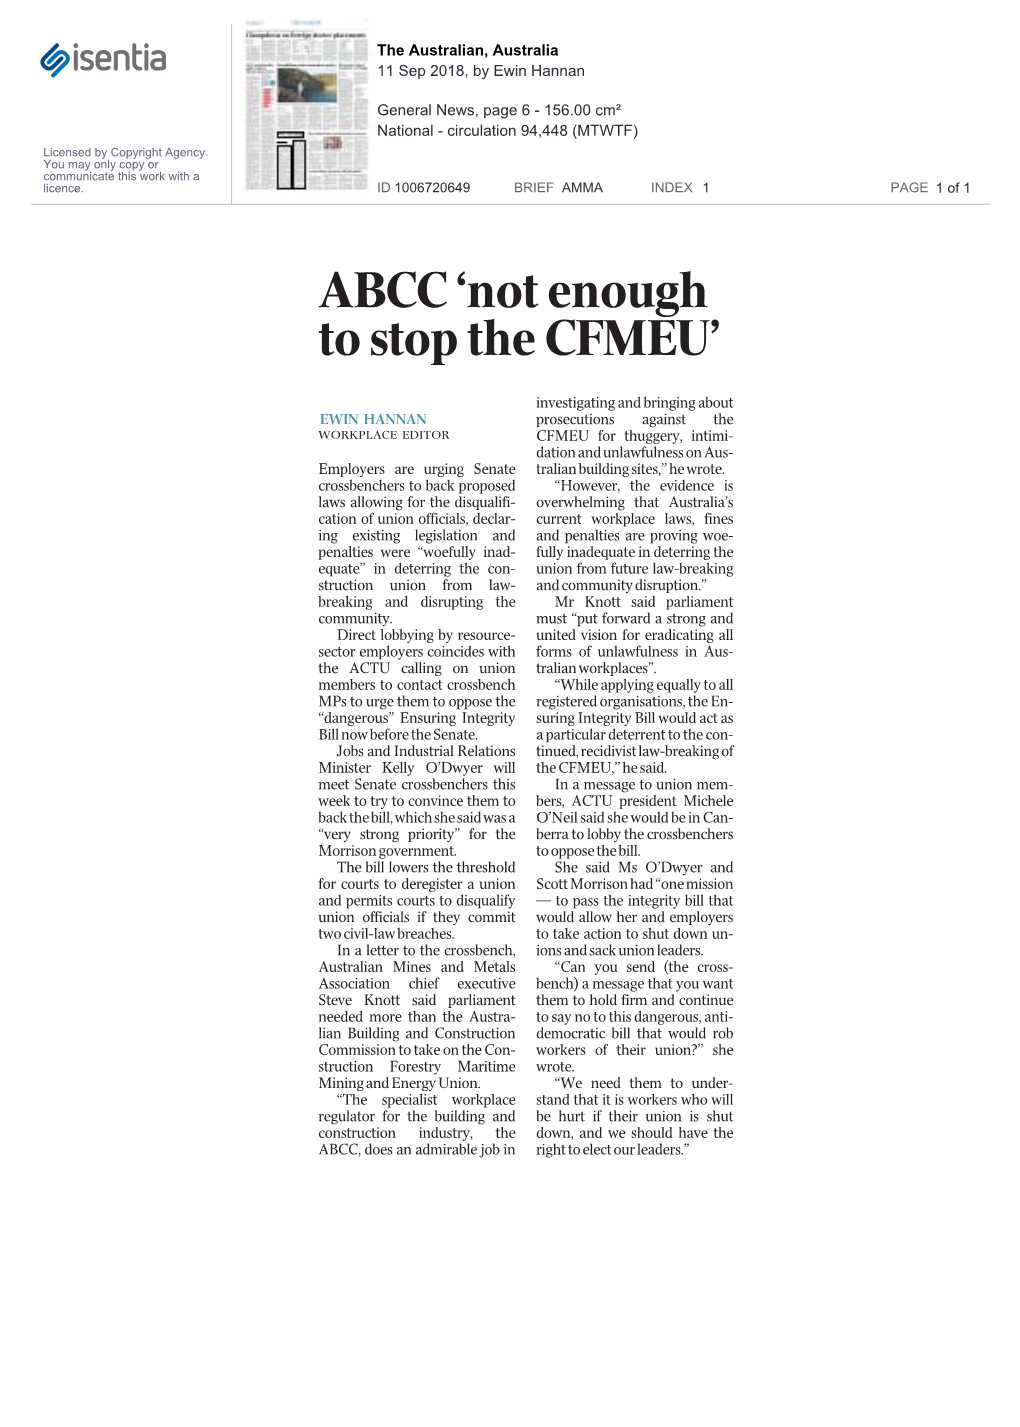 ABCC ‘Not Enough to Stop the CFMEU’